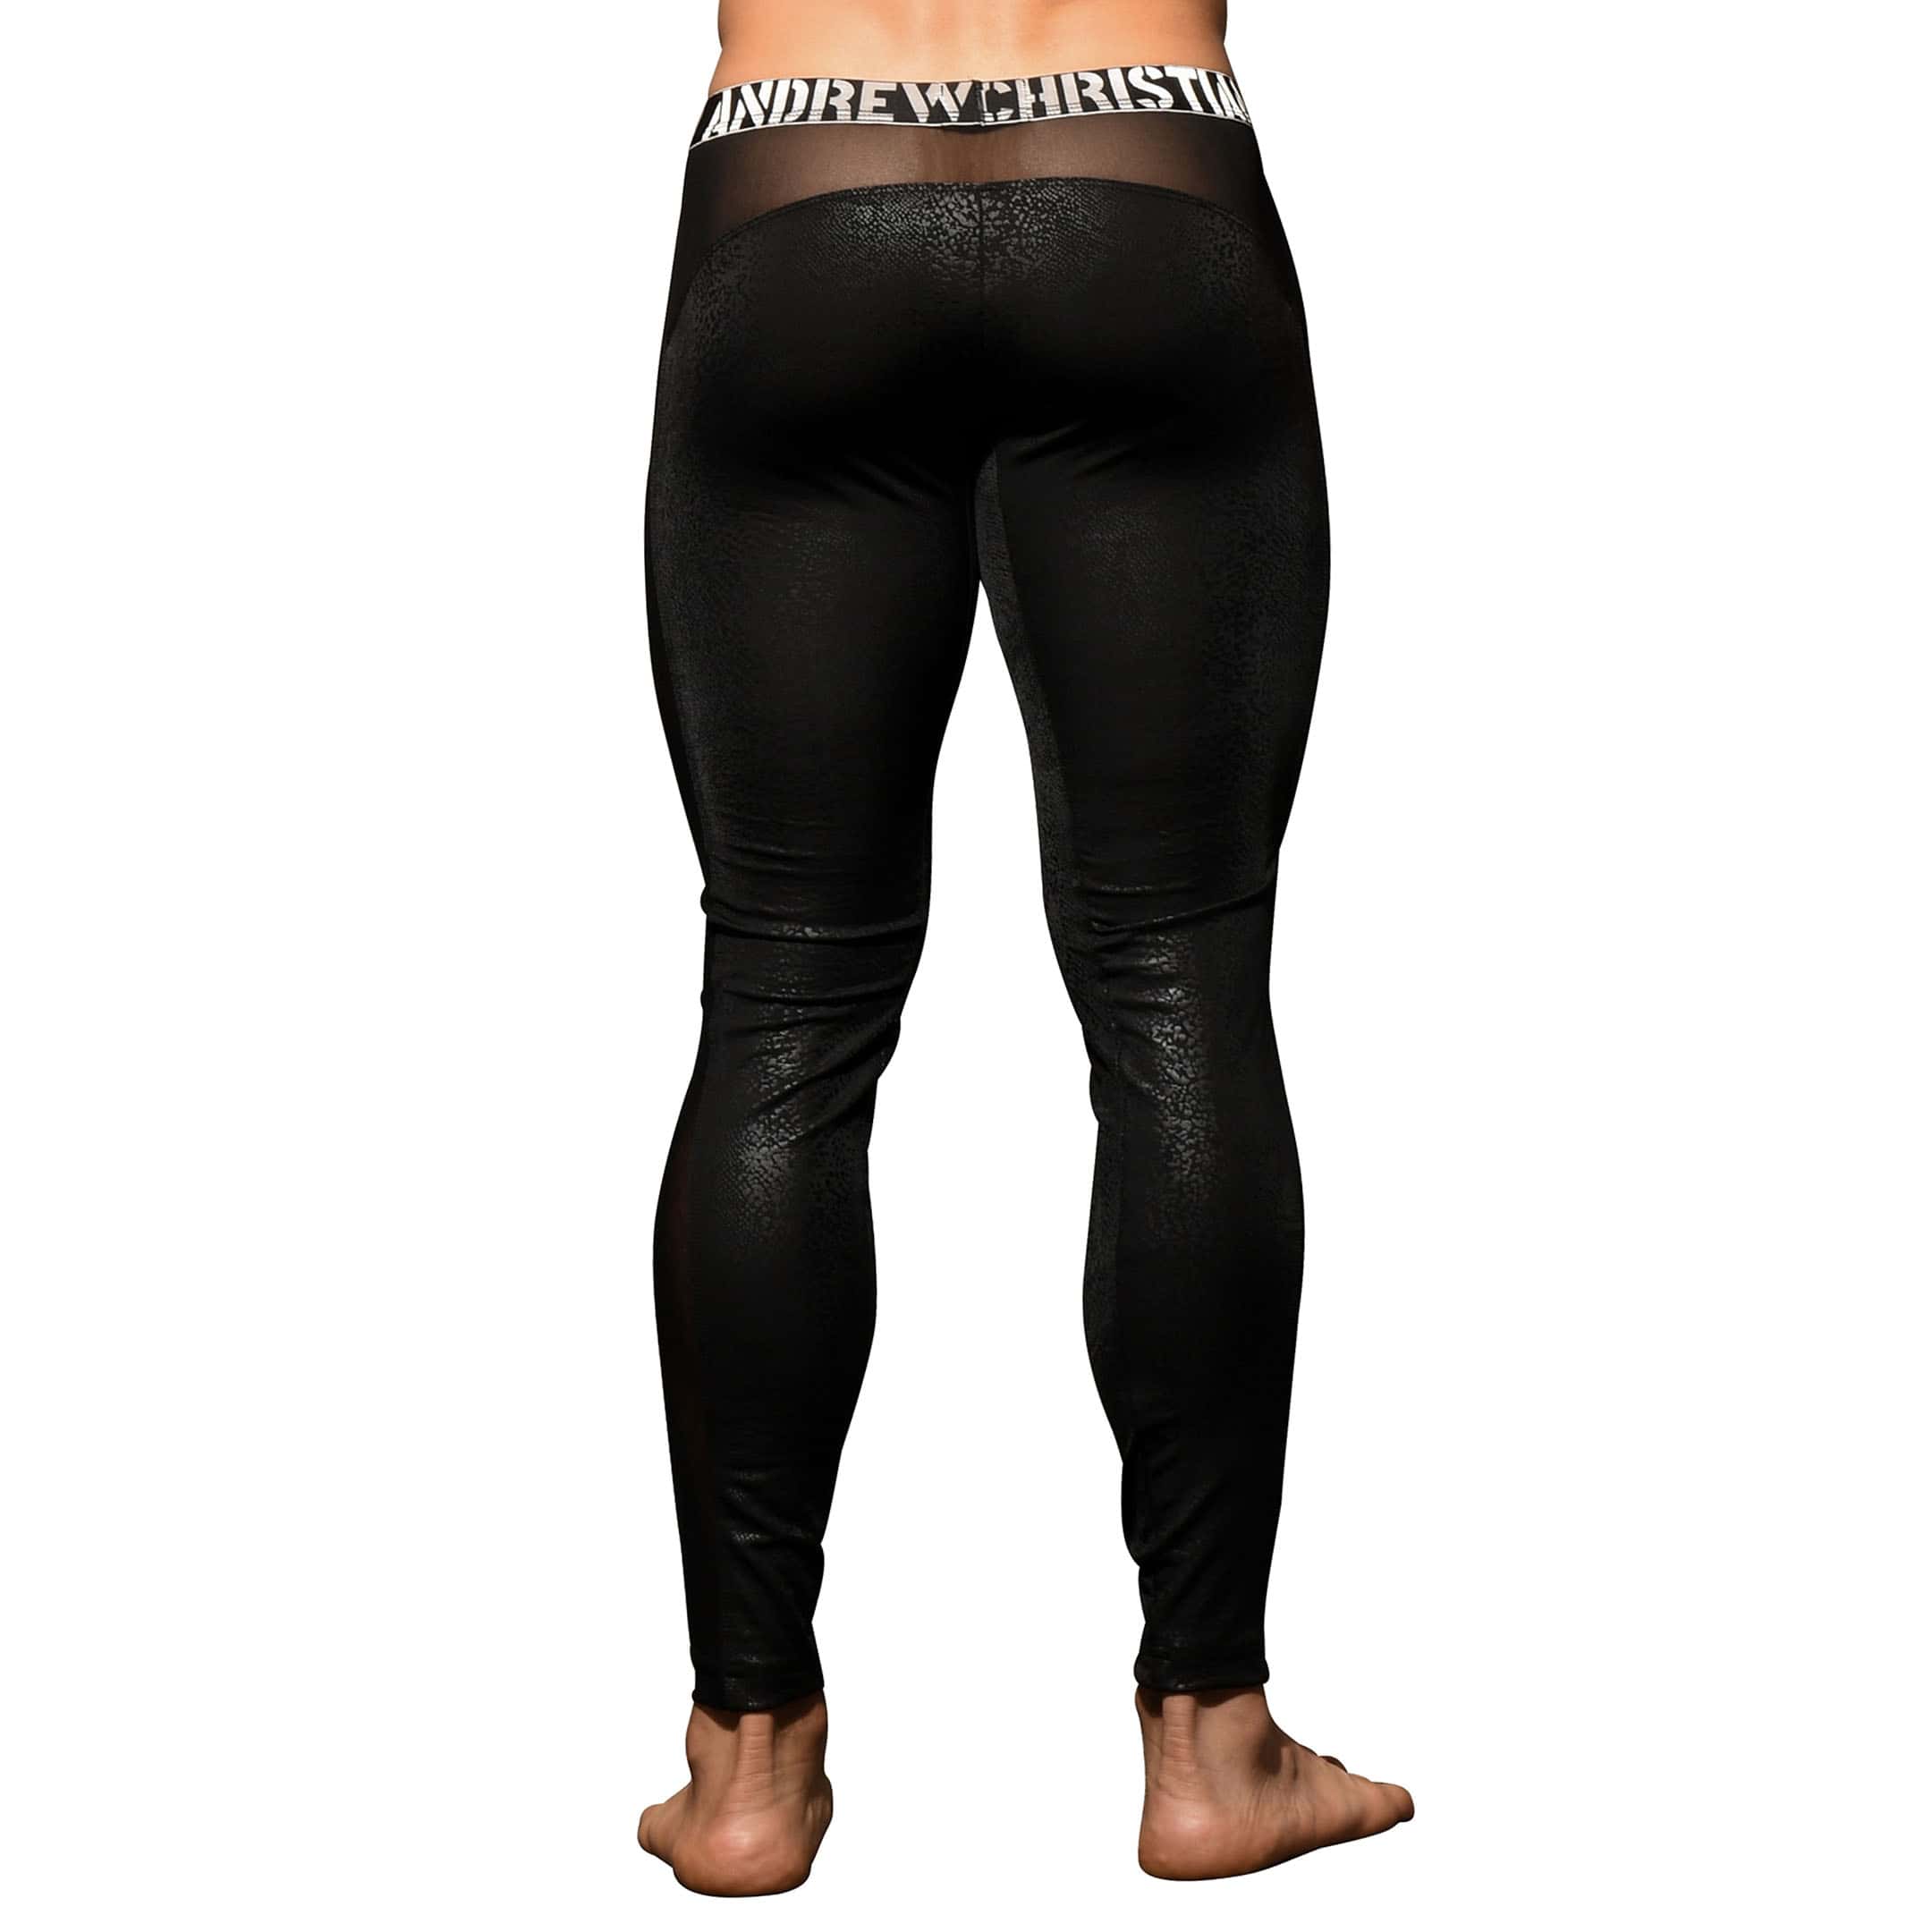 Buy Women Pants & Capris Online at Best Prices in India on Snapdeal